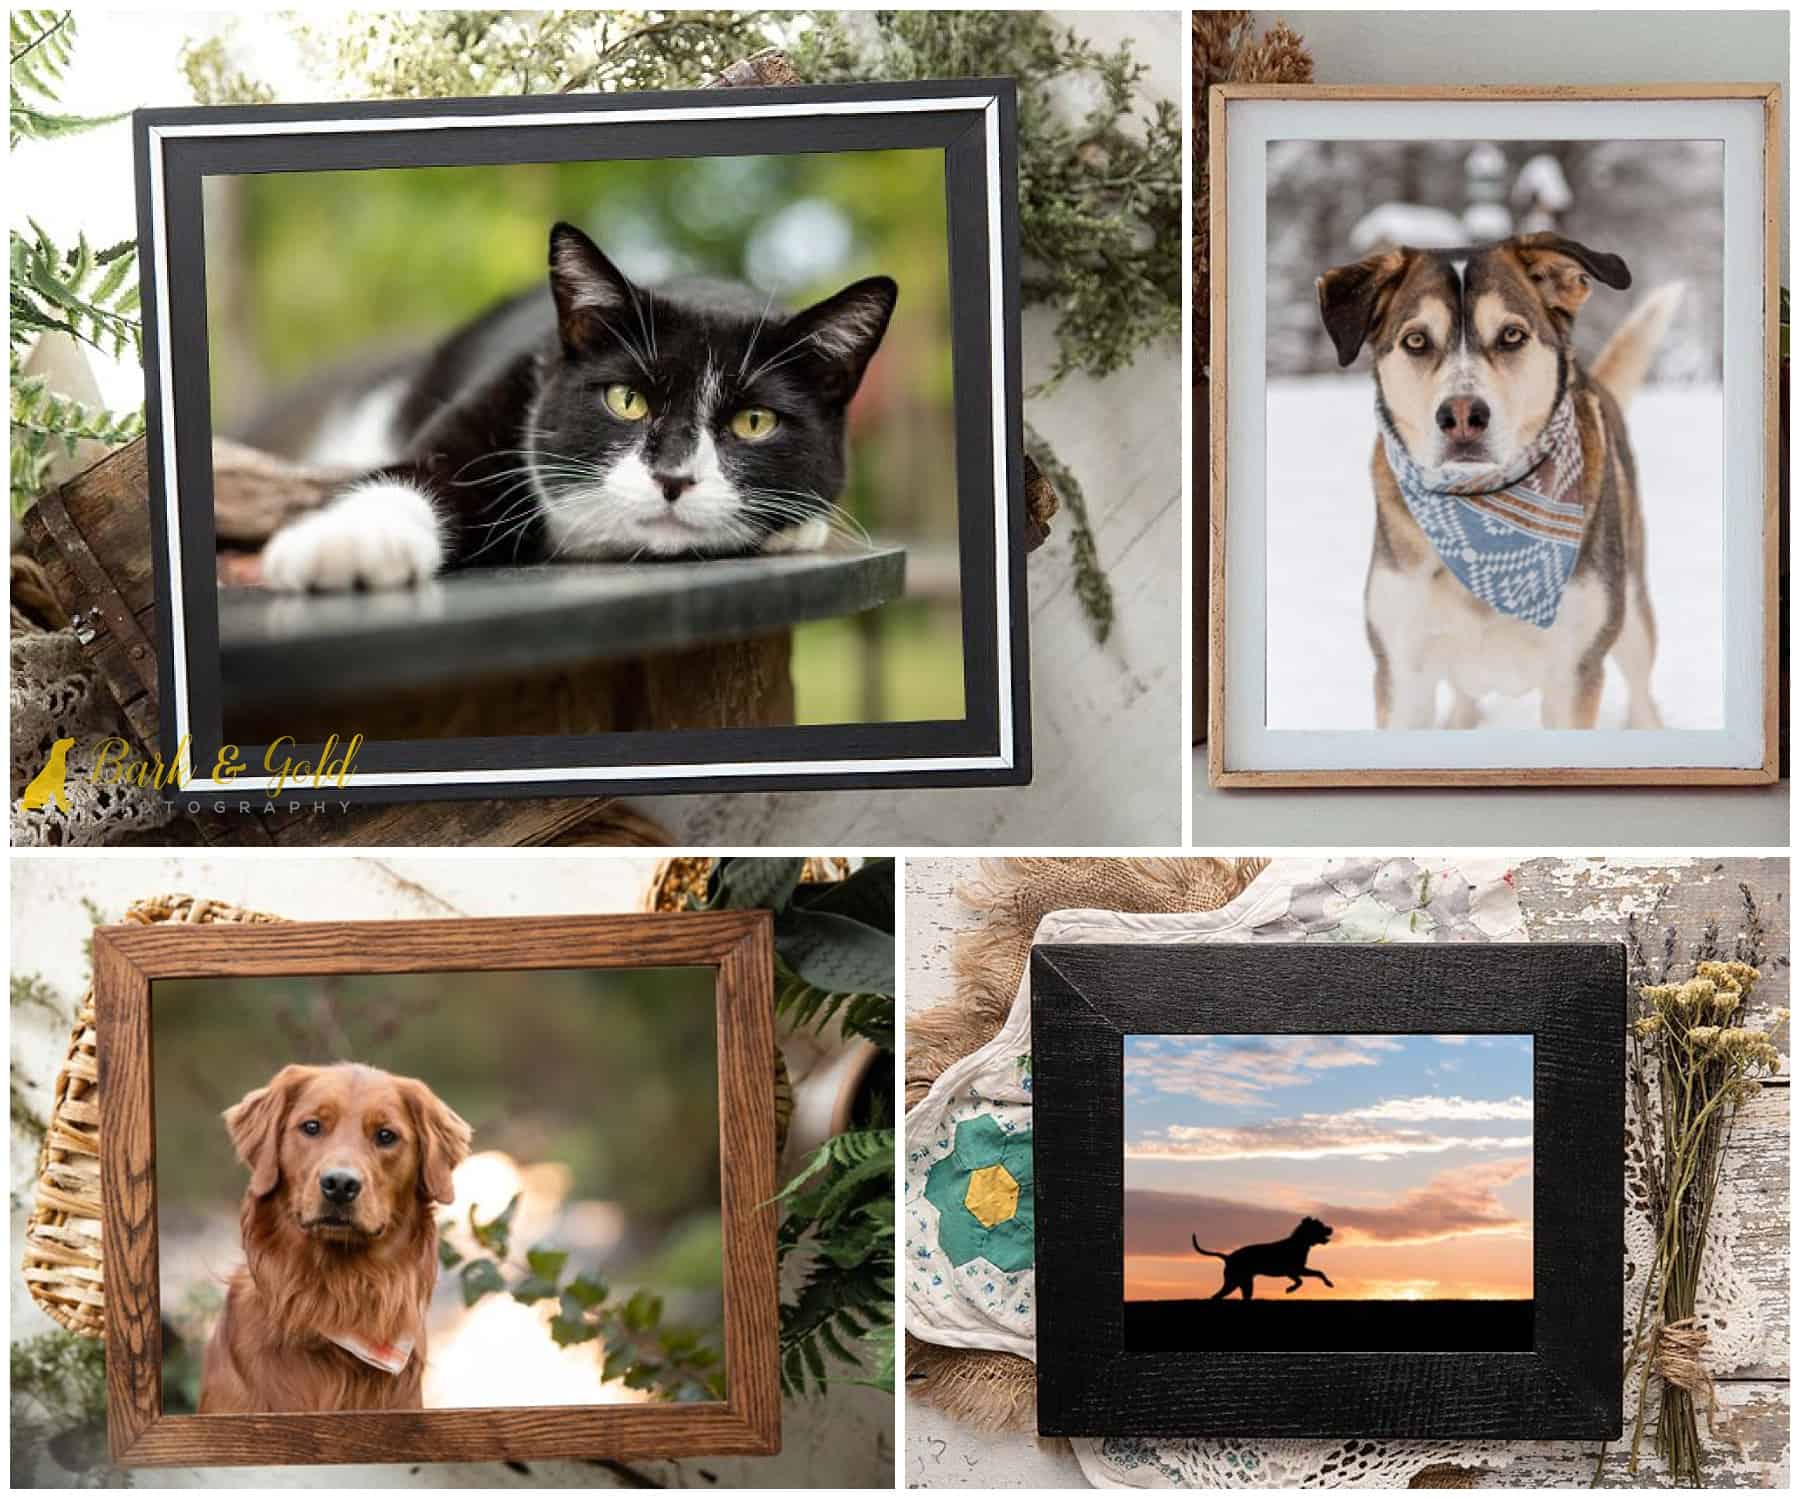 barnwood frames showing dogs and a cat ideal for modern home décor